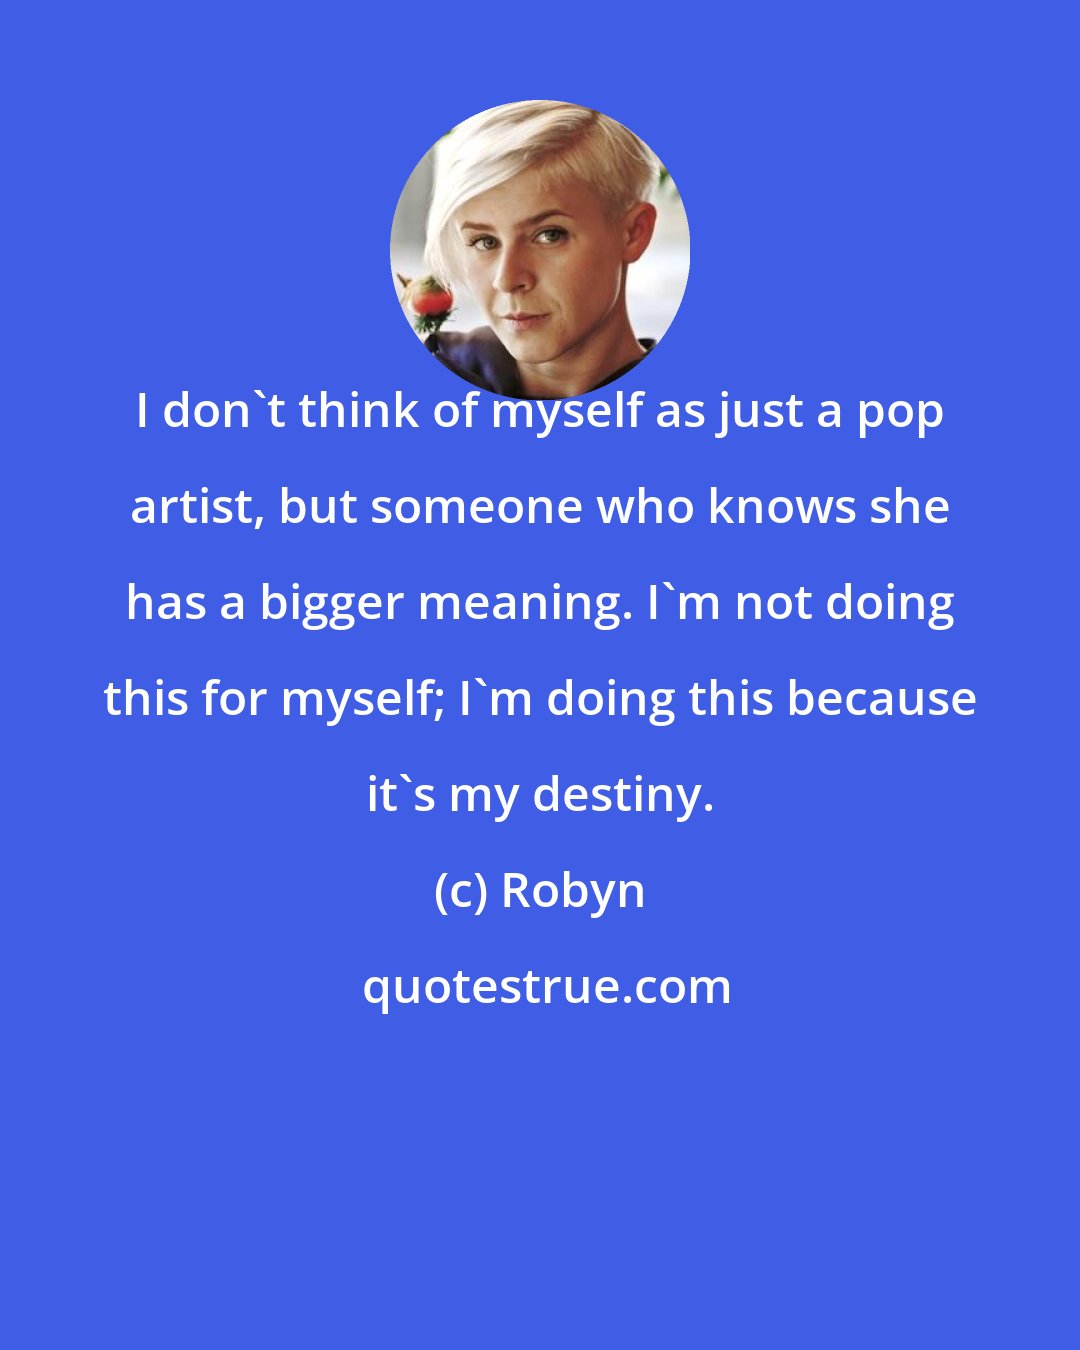 Robyn: I don't think of myself as just a pop artist, but someone who knows she has a bigger meaning. I'm not doing this for myself; I'm doing this because it's my destiny.